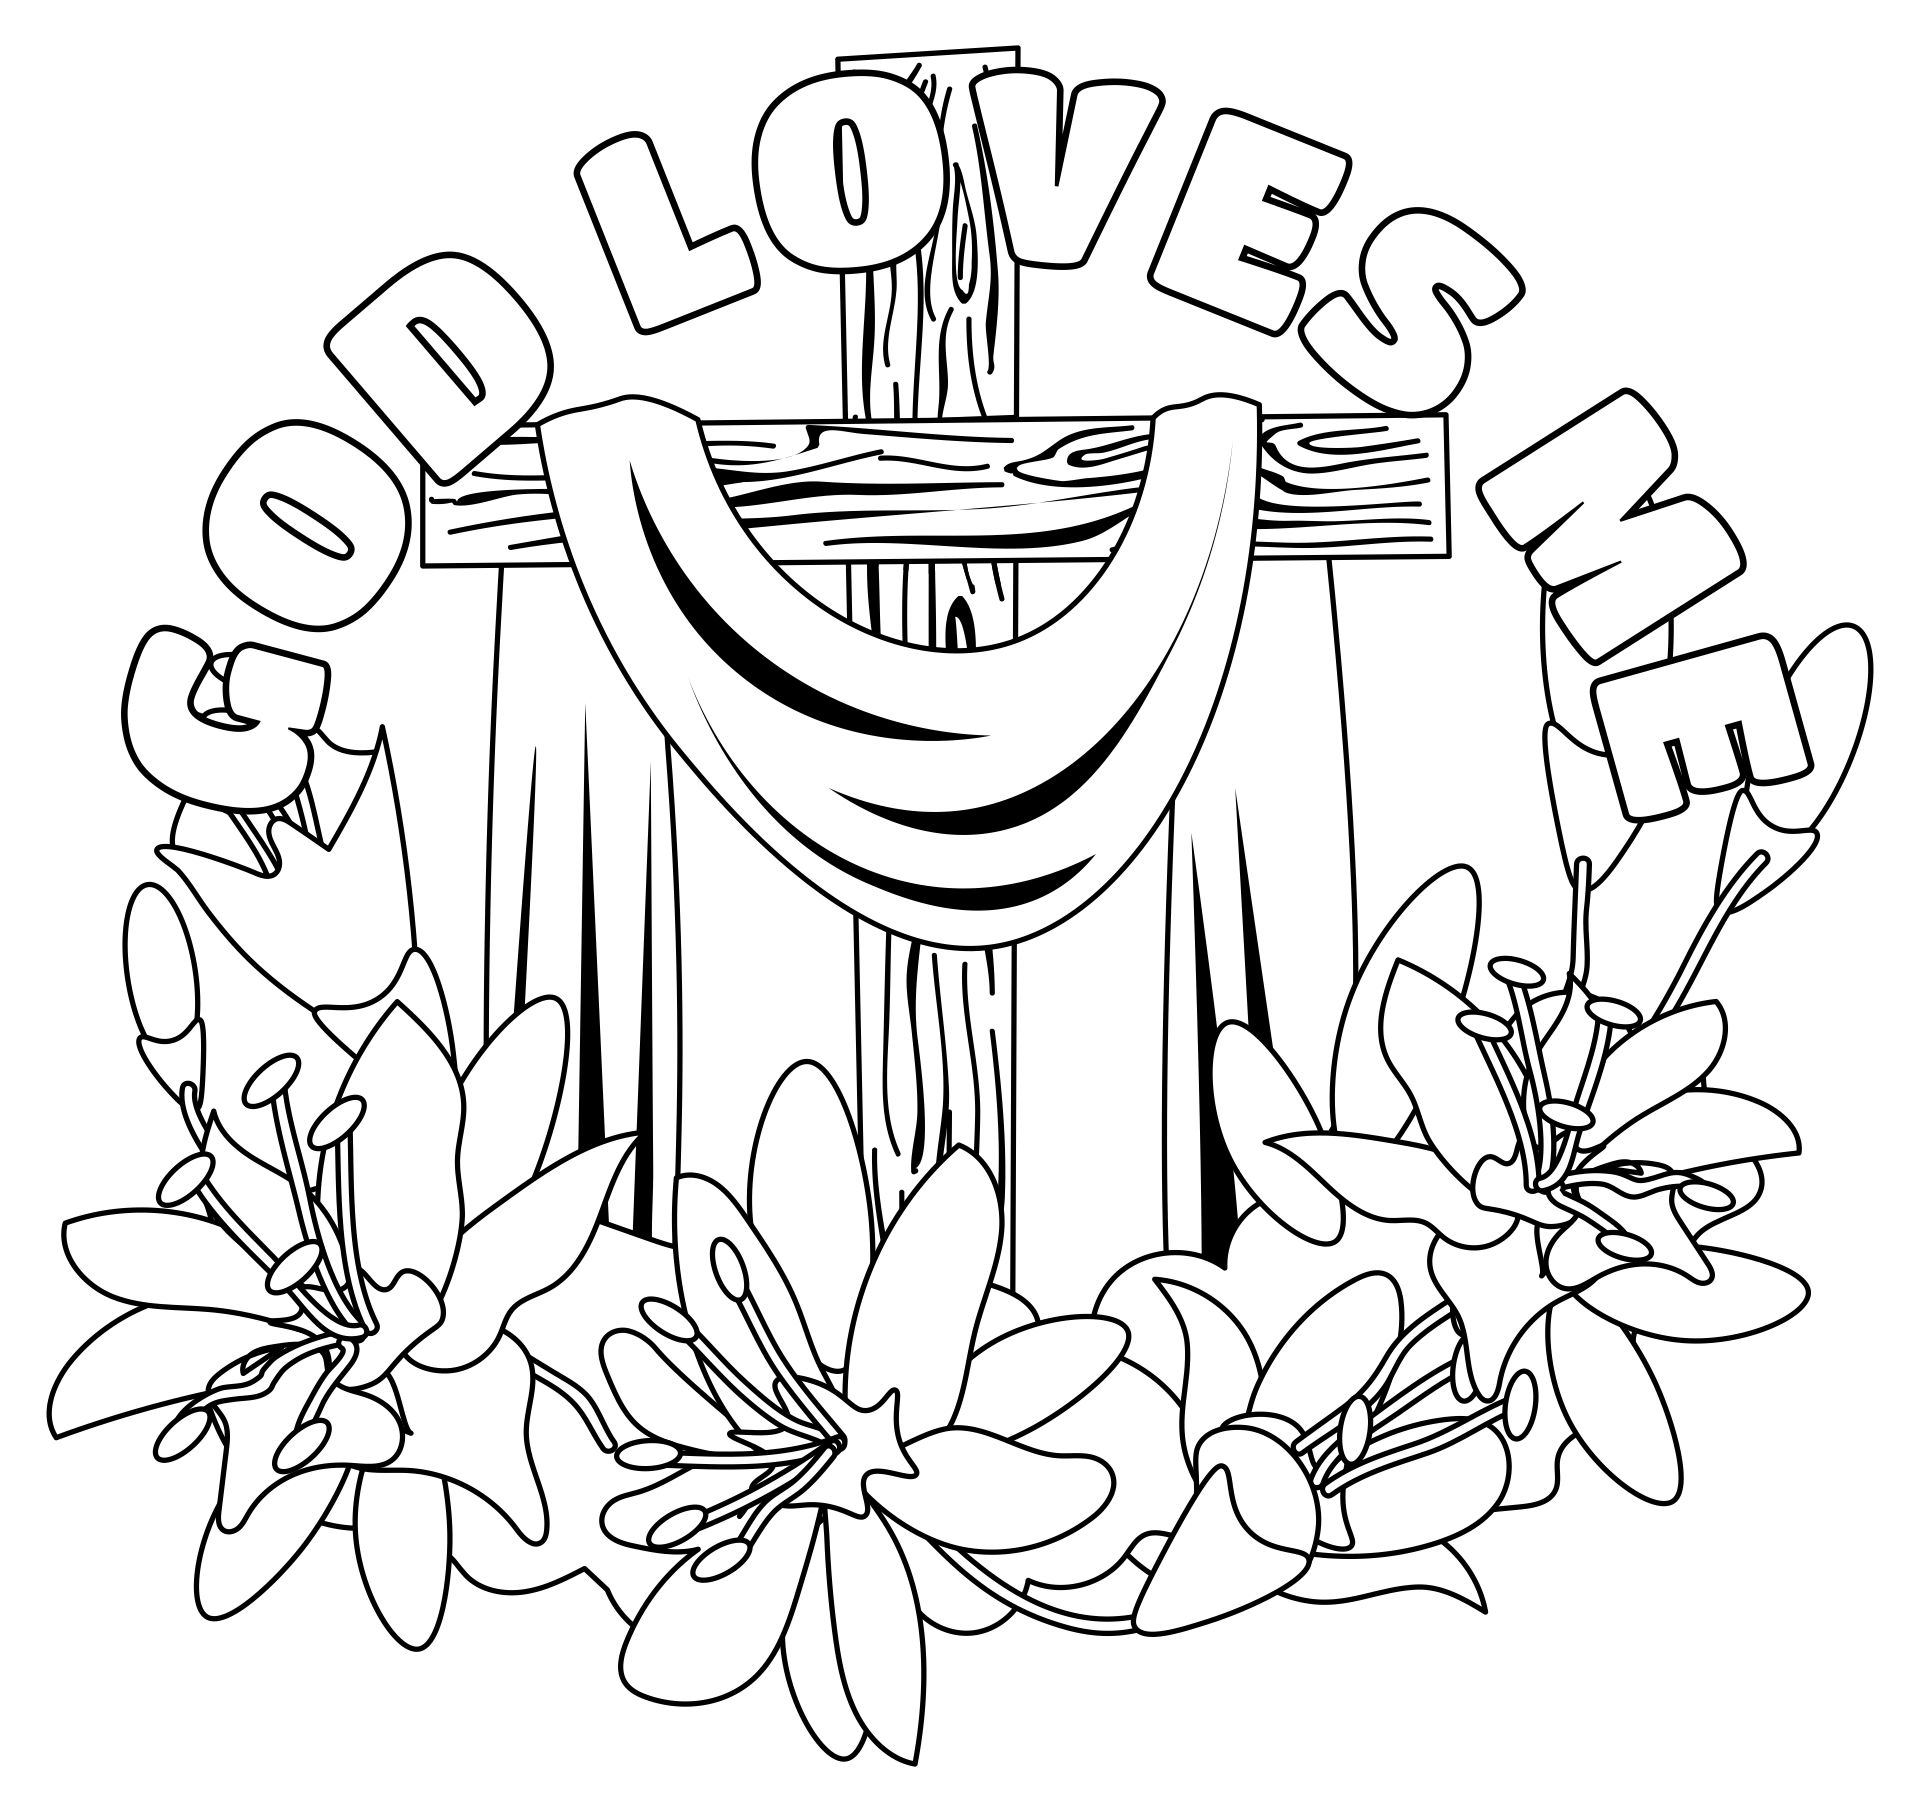 God Loves Me Coloring Pages